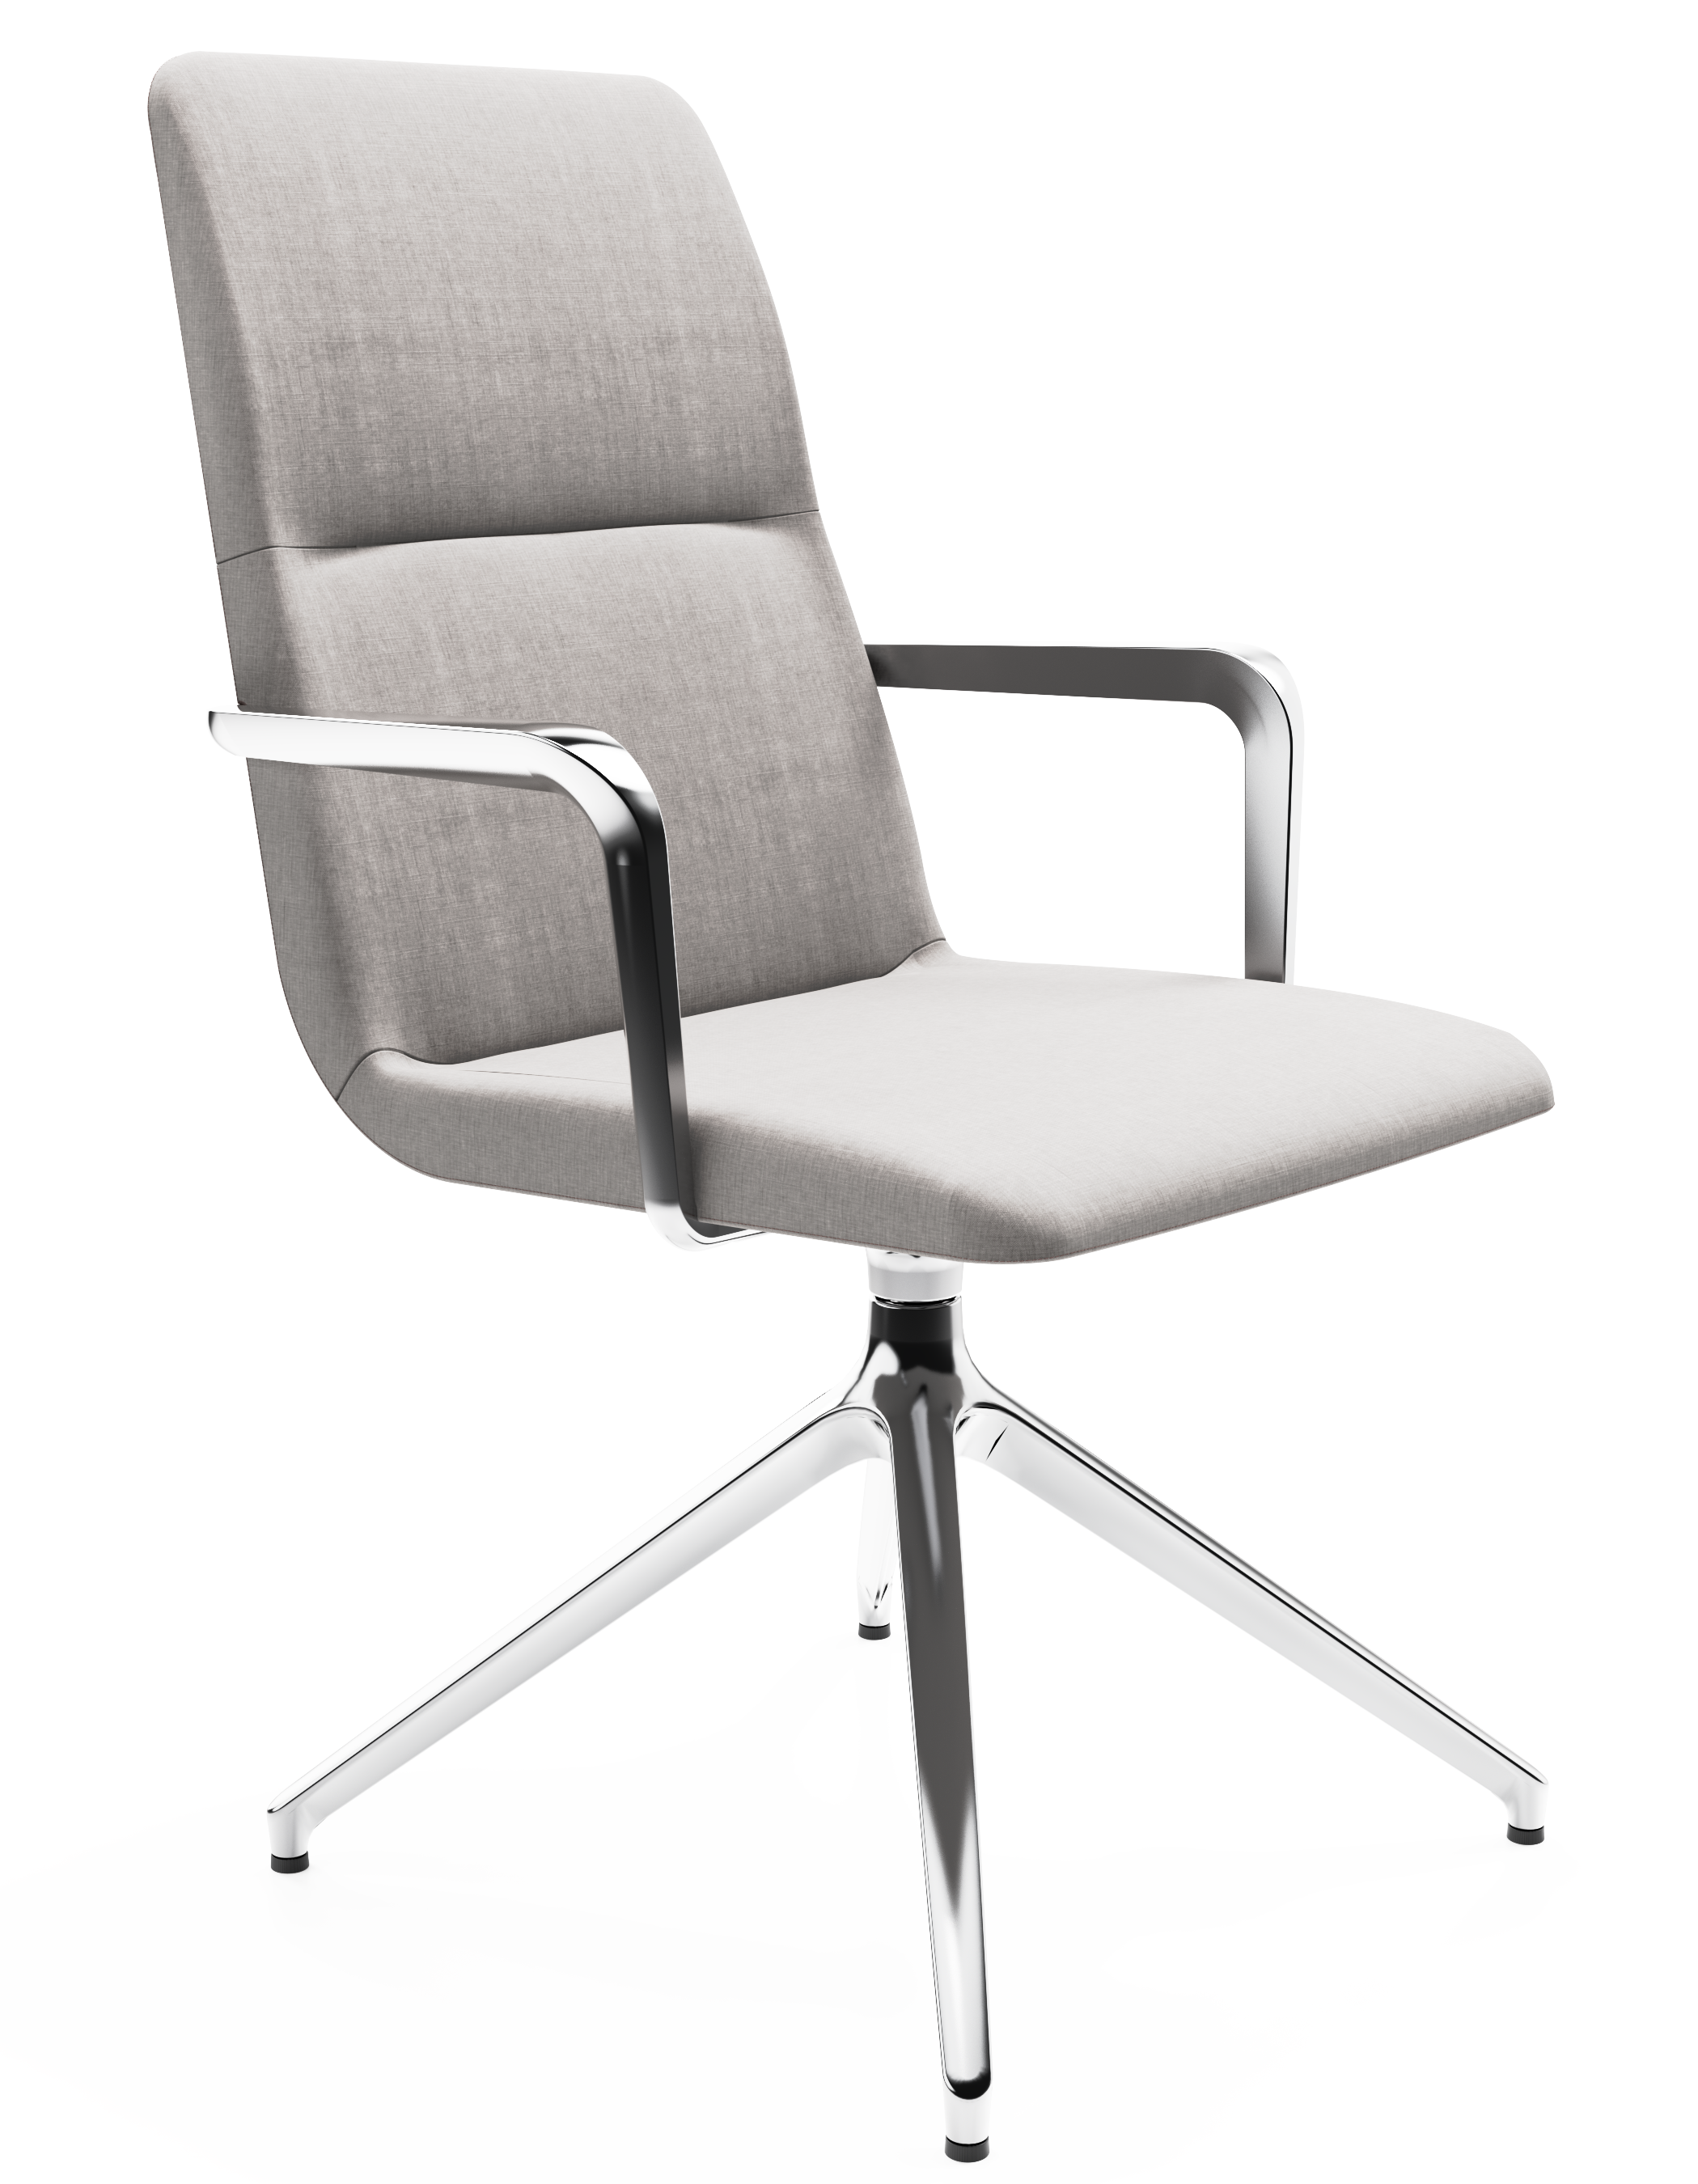 WS - Accord with arms 4 star pyramid base chair - chrome - remix 126 - front angle